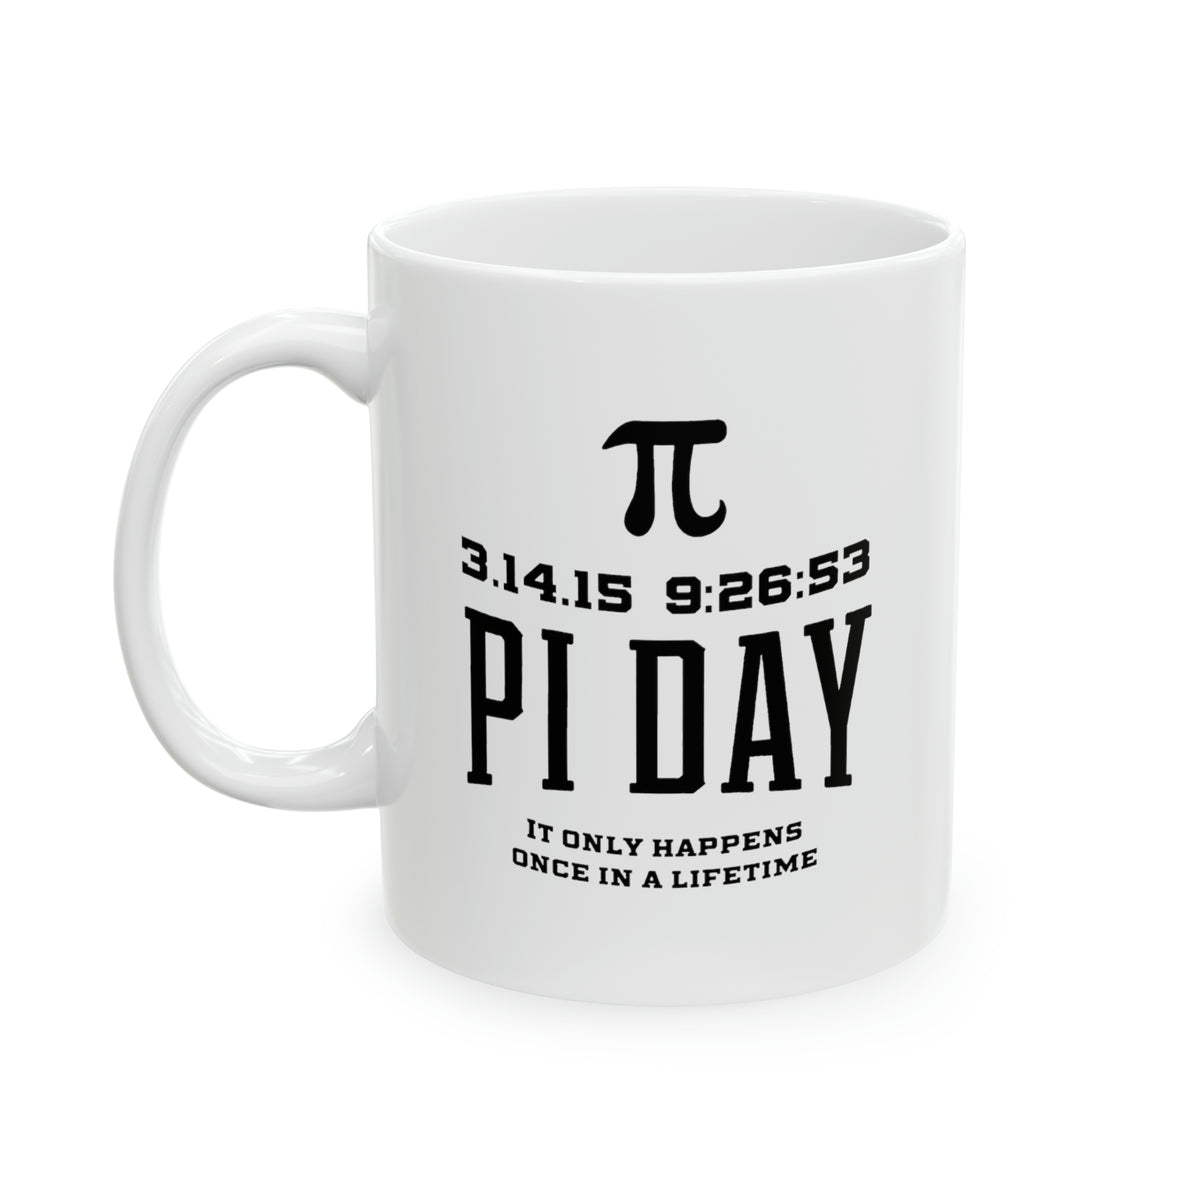 Pi Math Gifts - Funny Coffee Mug - Pi Day Once in a Lifetime - For Men Women